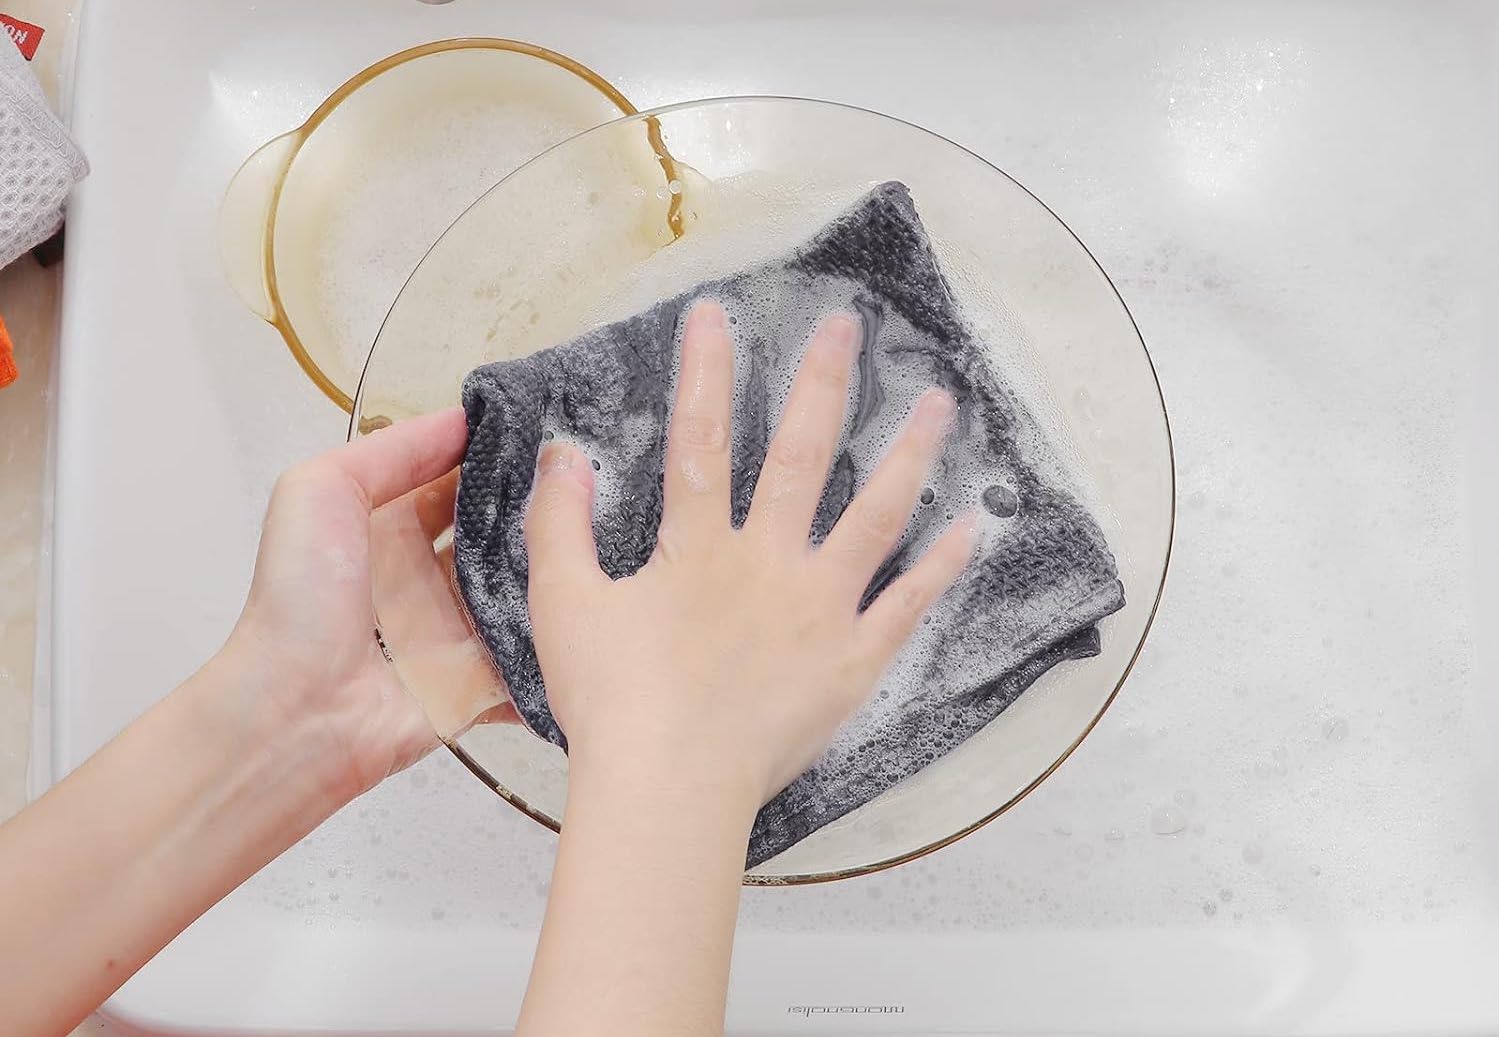 Amazon's #1 Best-Selling Kitchen Dish Cloths Just Went on Sale for Under $10